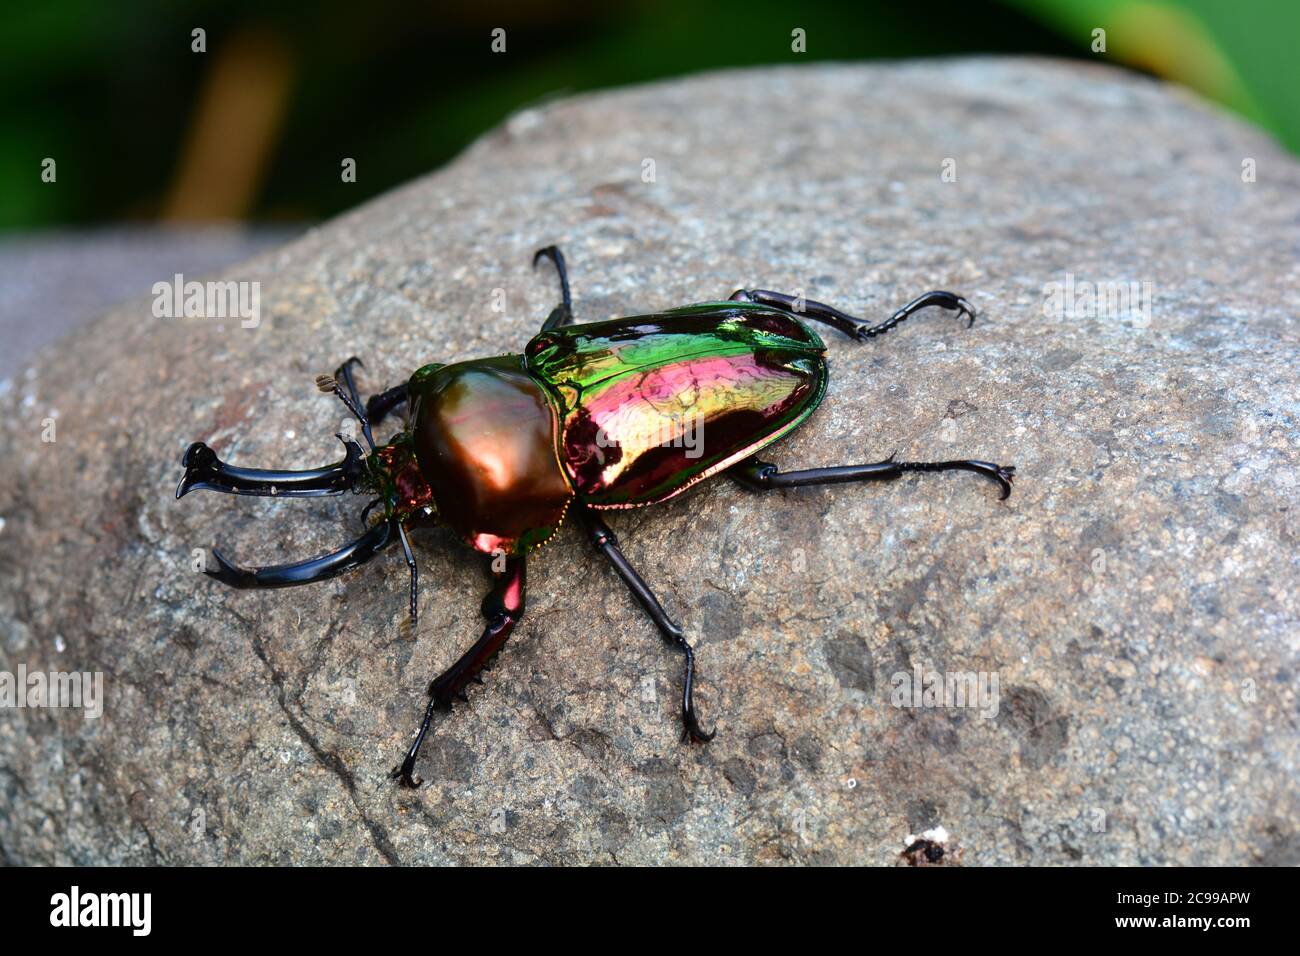 A Rainbow stag beetle sunning on a rock. Stock Photo